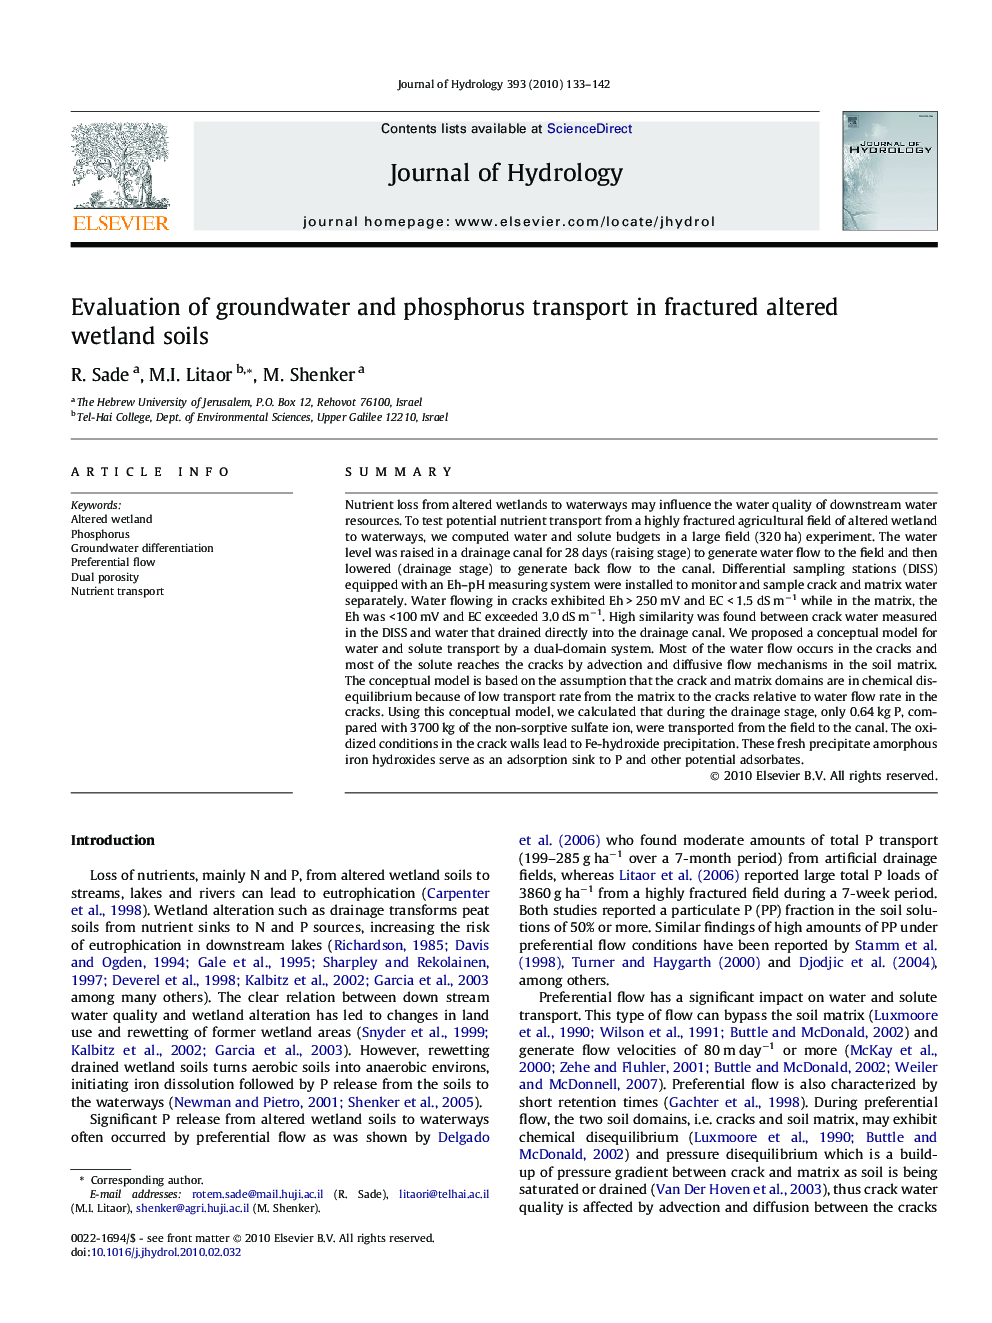 Evaluation of groundwater and phosphorus transport in fractured altered wetland soils